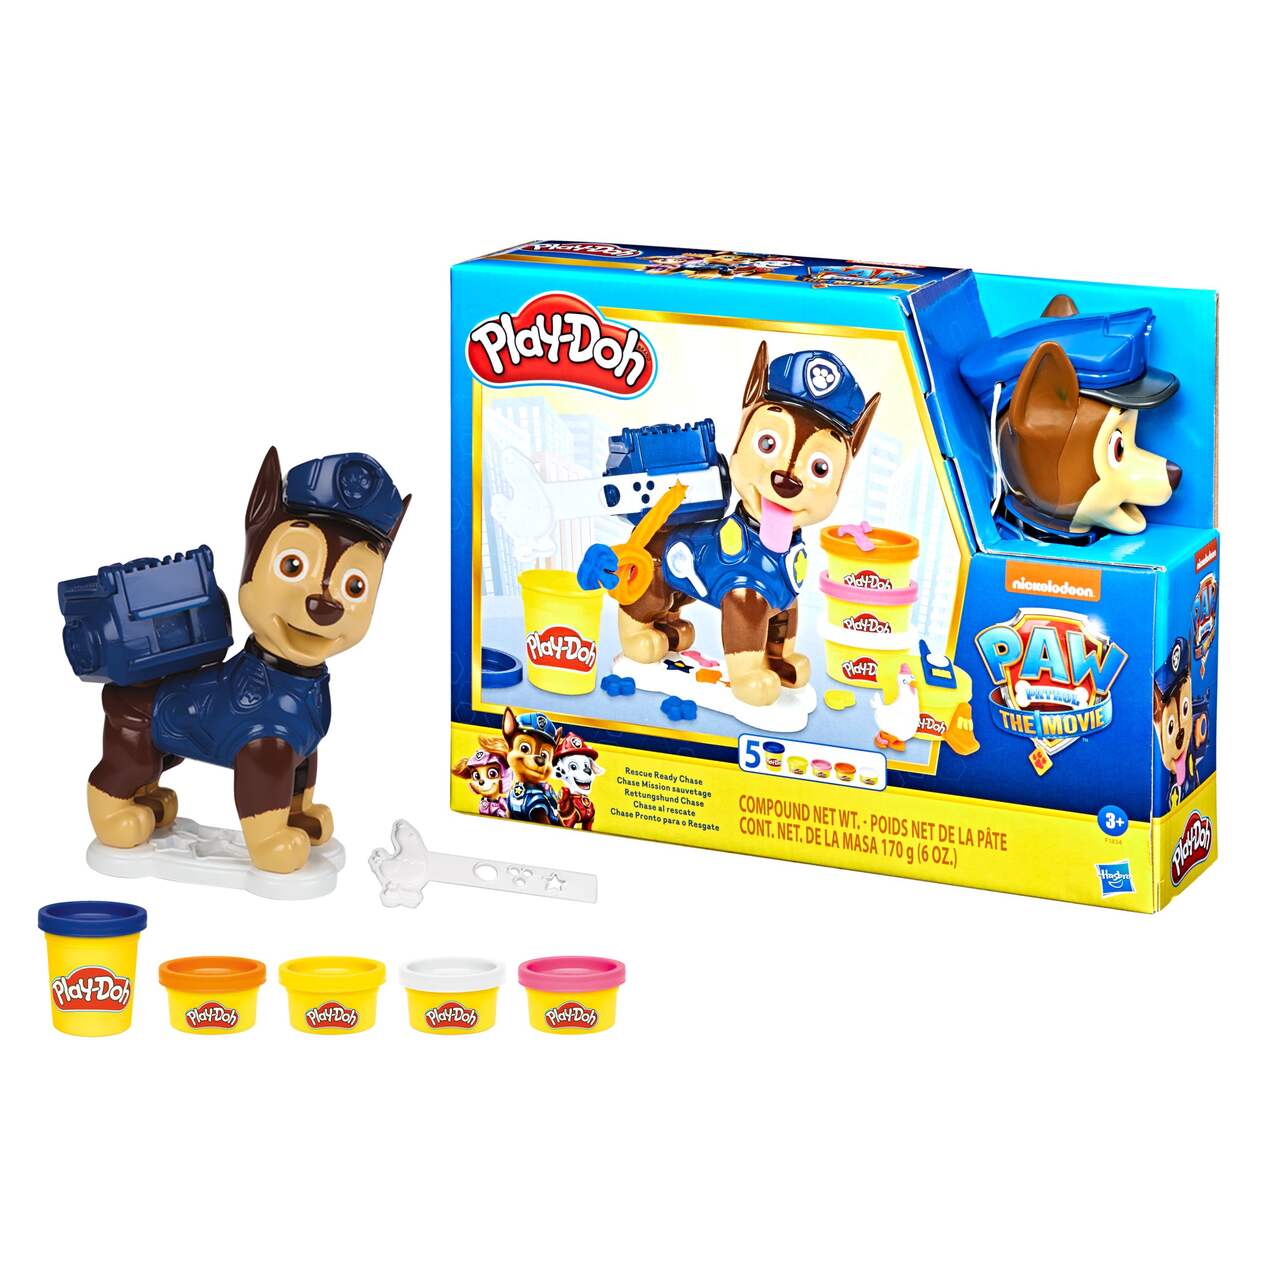 https://media-www.canadiantire.ca/product/seasonal-gardening/toys/preschool-toys-activities/0508226/playdoh-paw-patrol-chase-42f4d3d1-4724-41fb-94a7-018e0719c8d1-jpgrendition.jpg?imdensity=1&imwidth=640&impolicy=mZoom